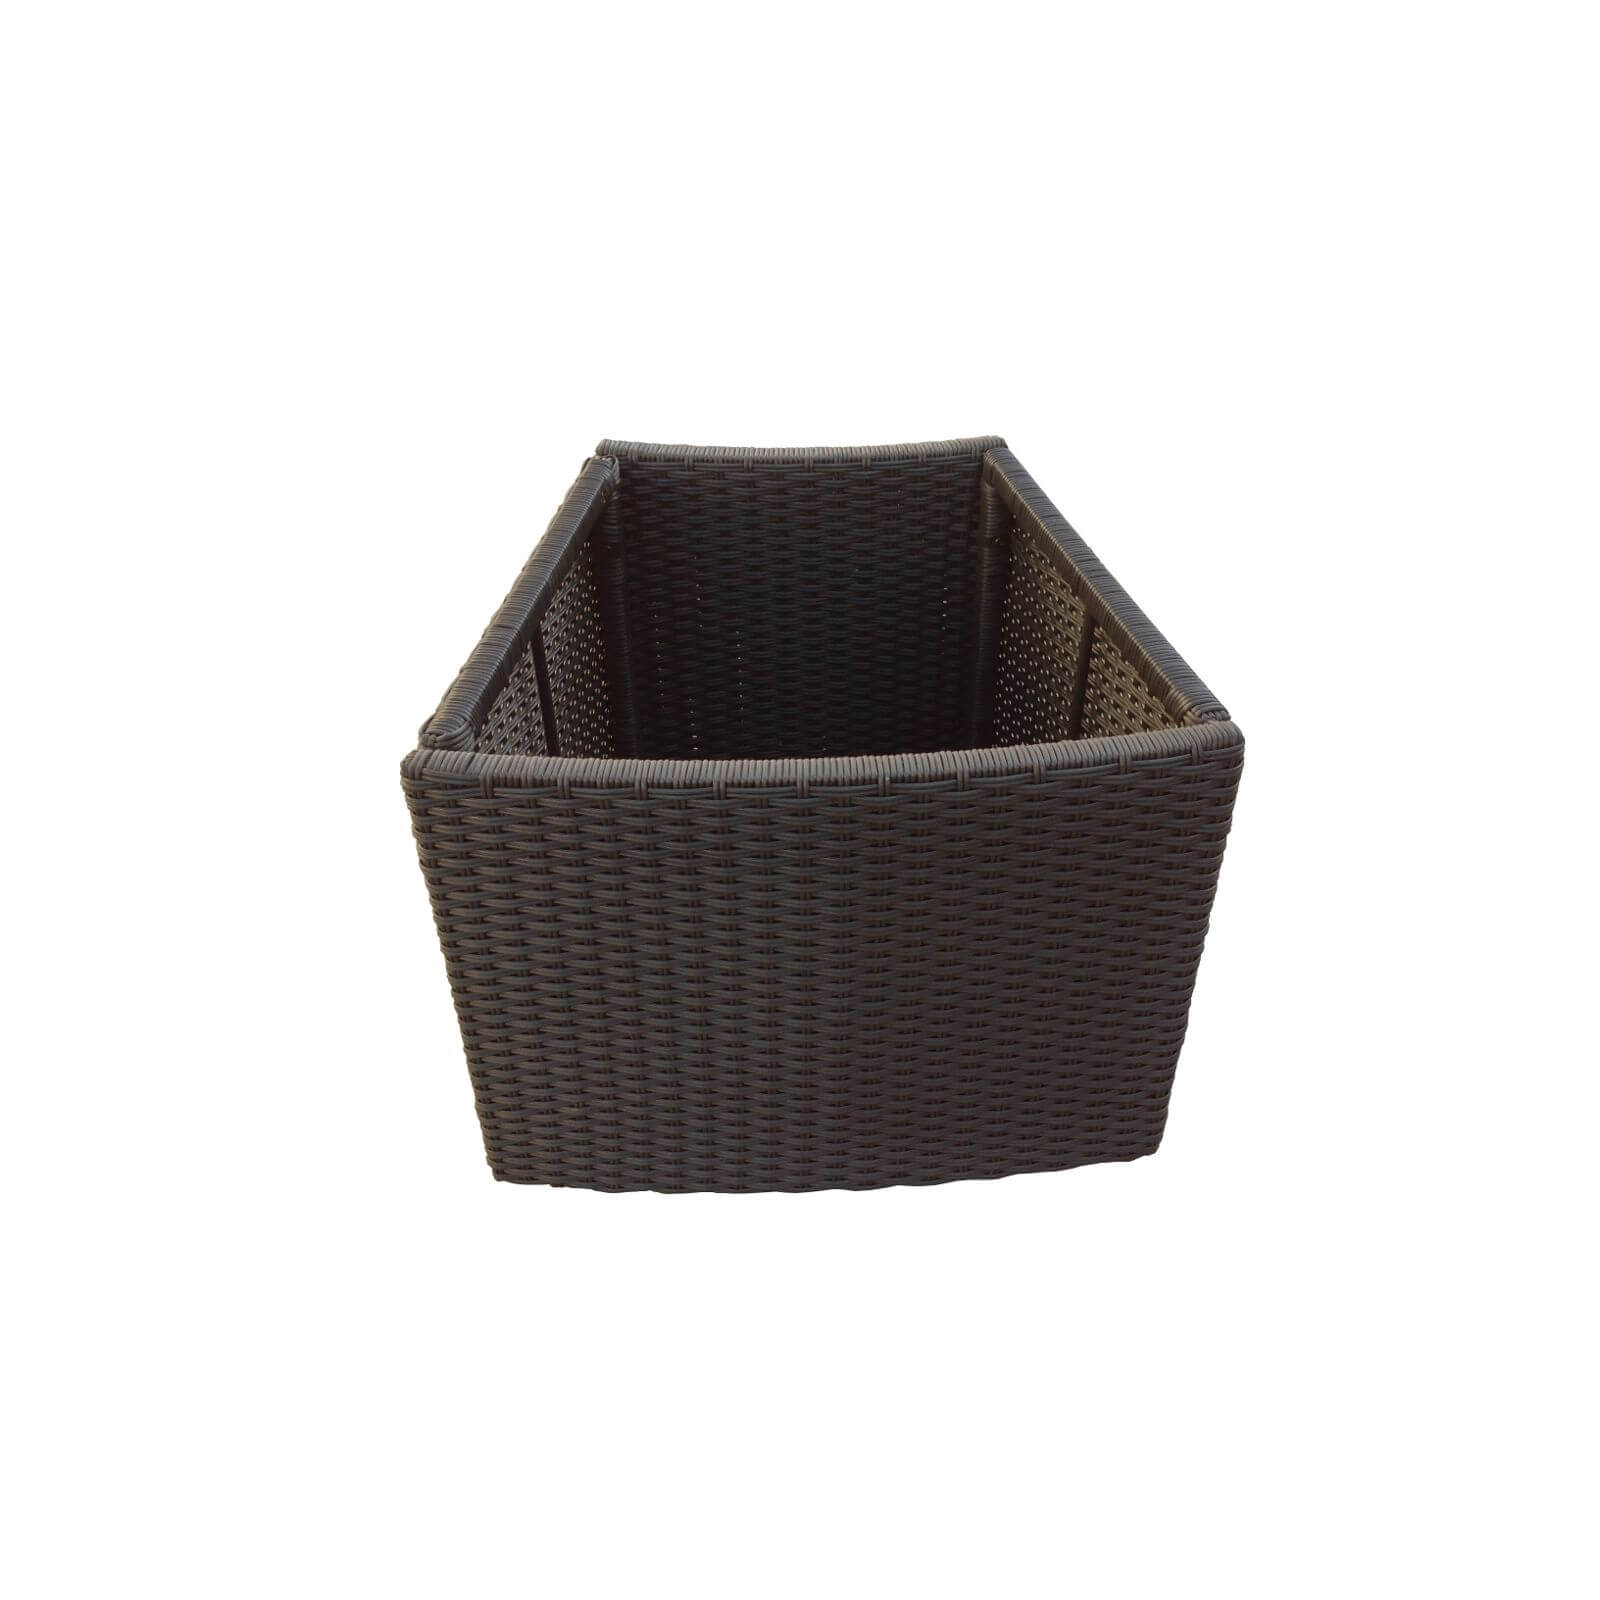 Photo of Canadian Spa Rattan Deep Planter For Round Spa